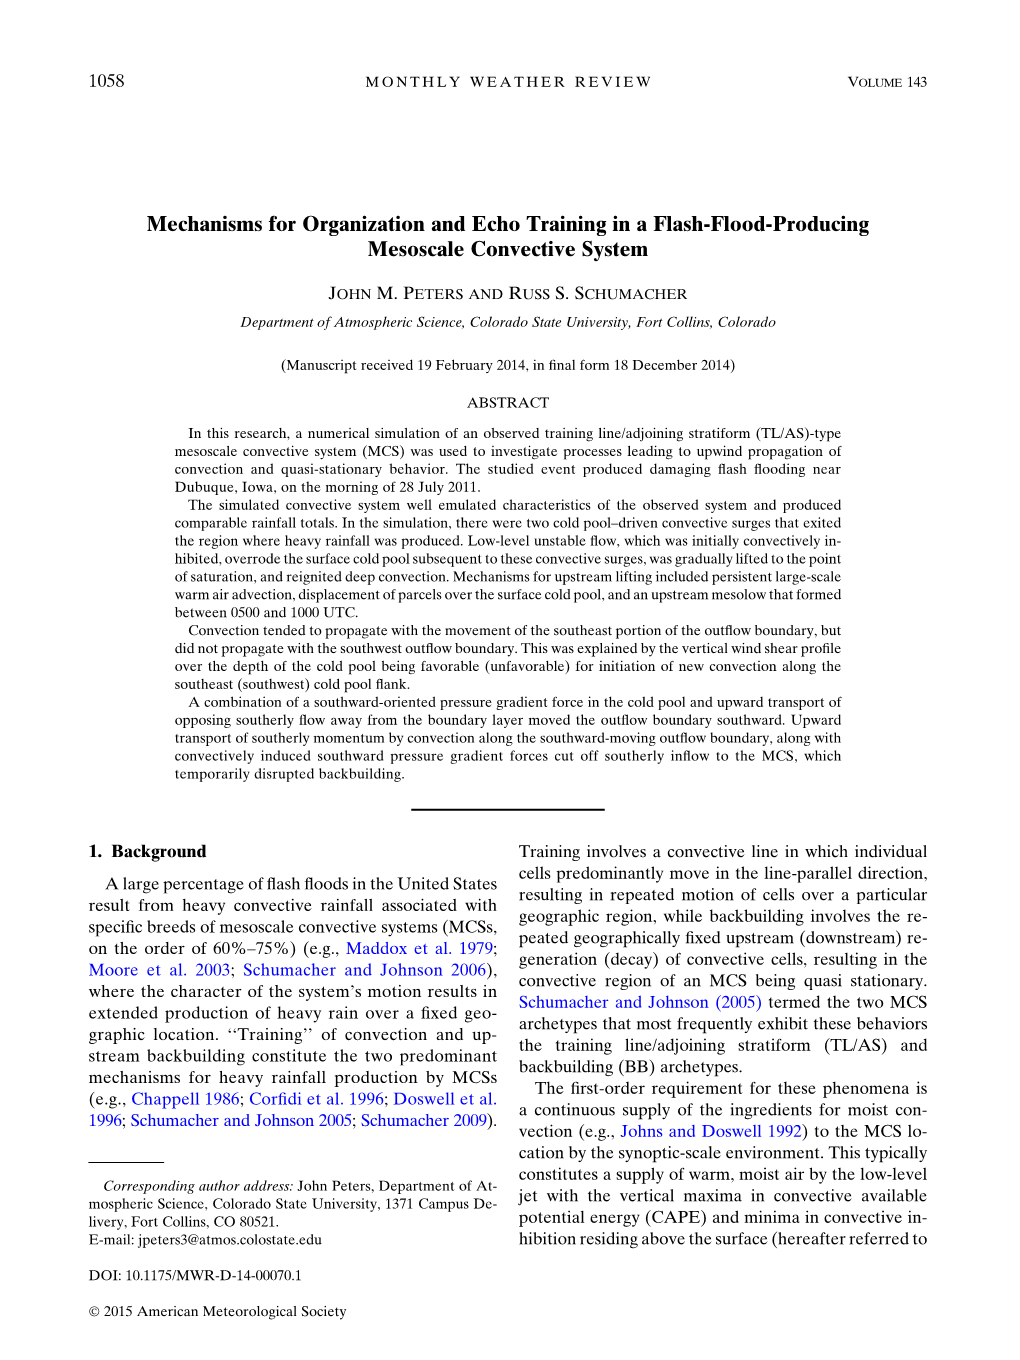 Mechanisms for Organization and Echo Training in a Flash-Flood-Producing Mesoscale Convective System